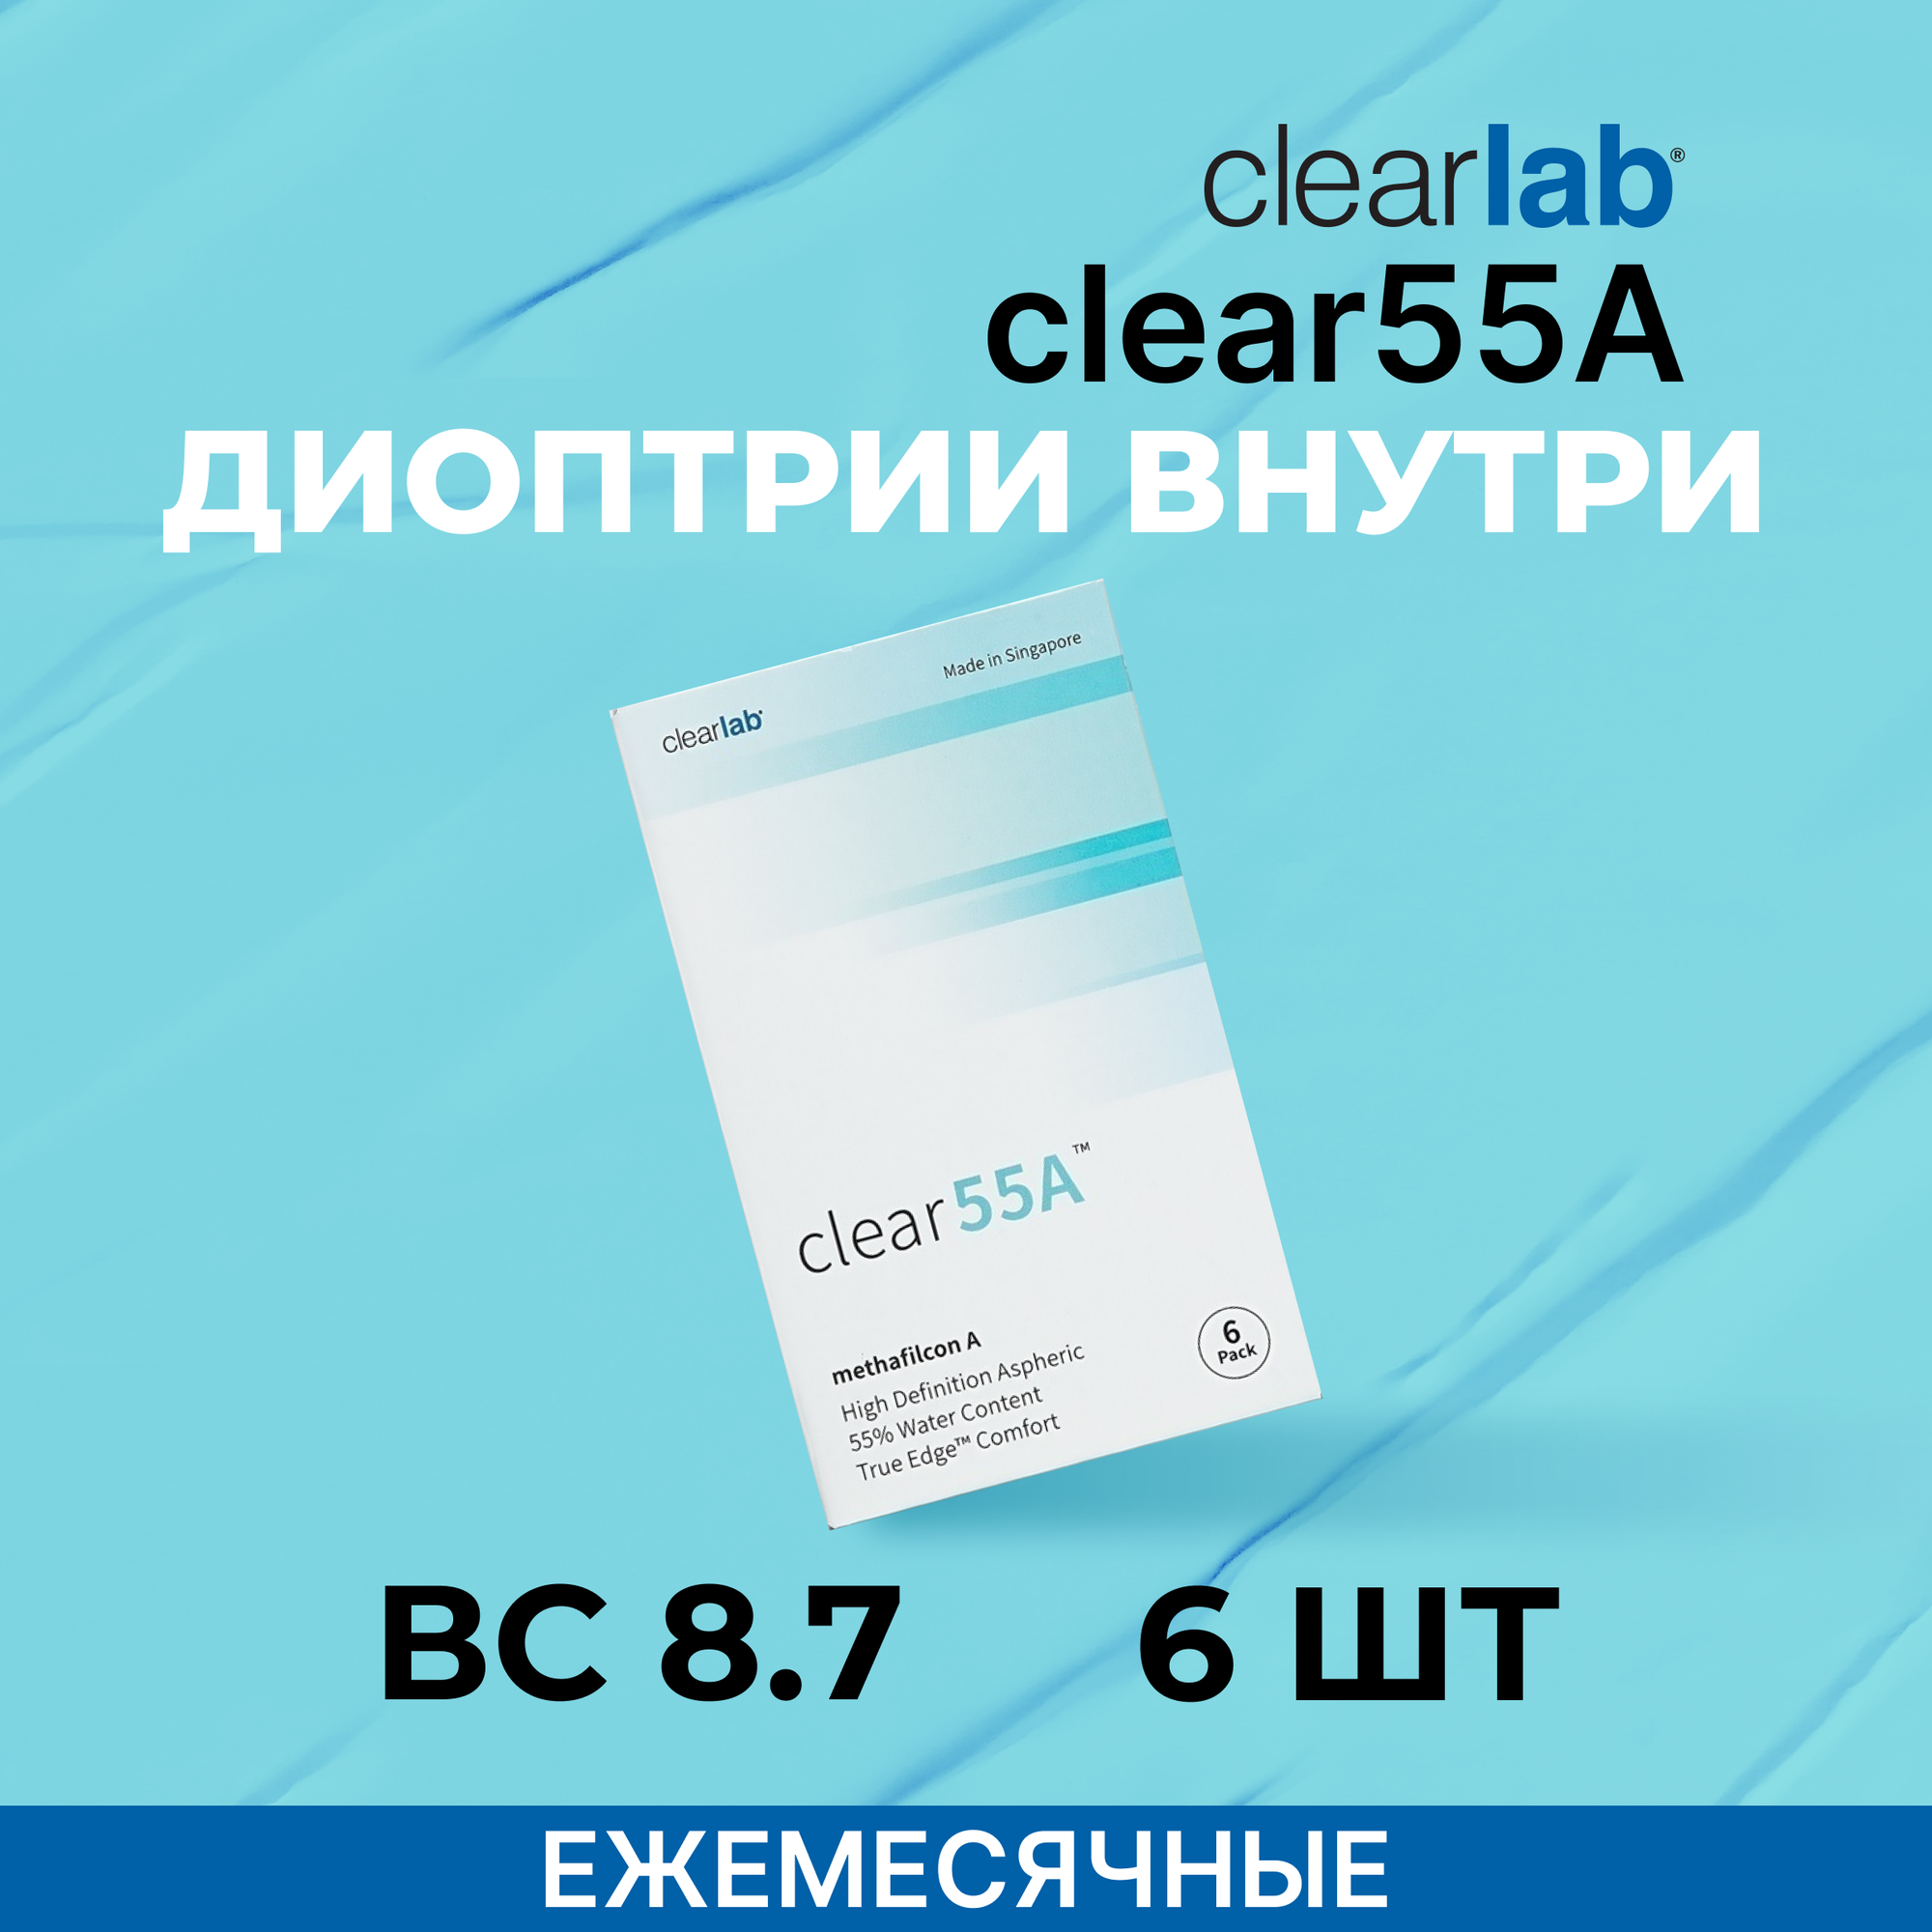   Clearlab Clear 55A ( 55) (6 )  +5.50 R.8.7